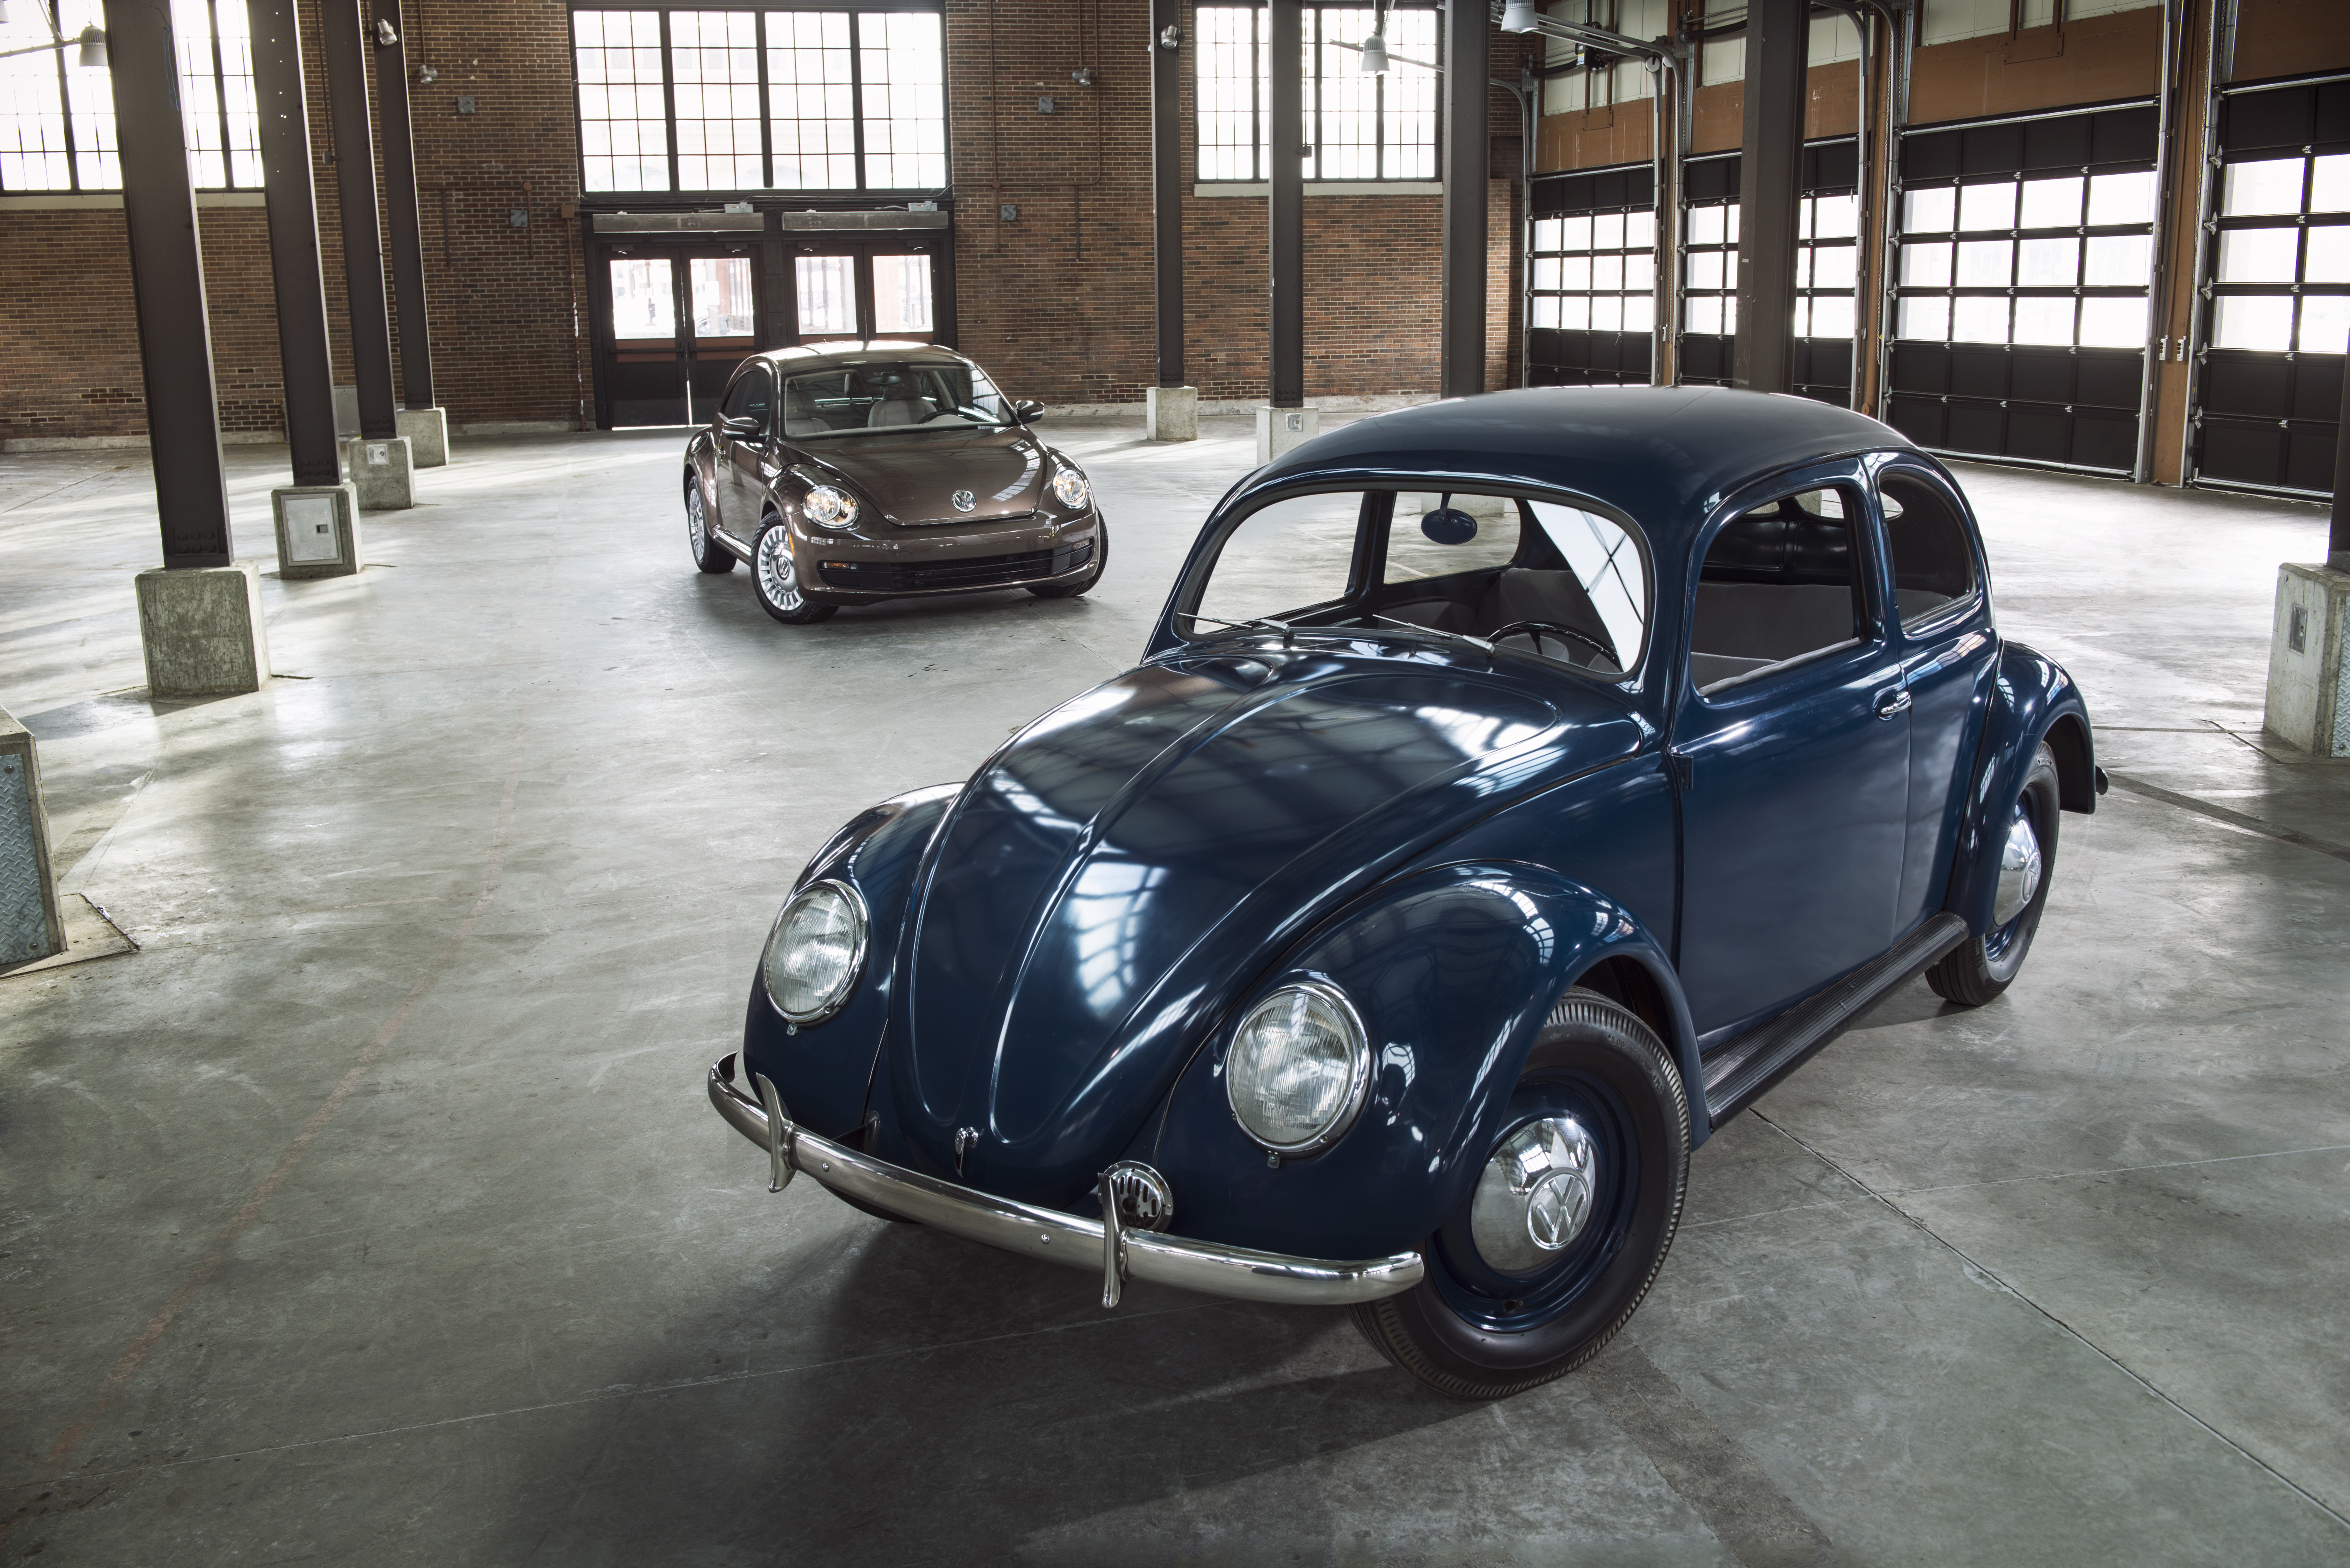 THE VOLKSWAGEN BEETLE CELEBRATES 65 YEARS IN THE UNITED STATES